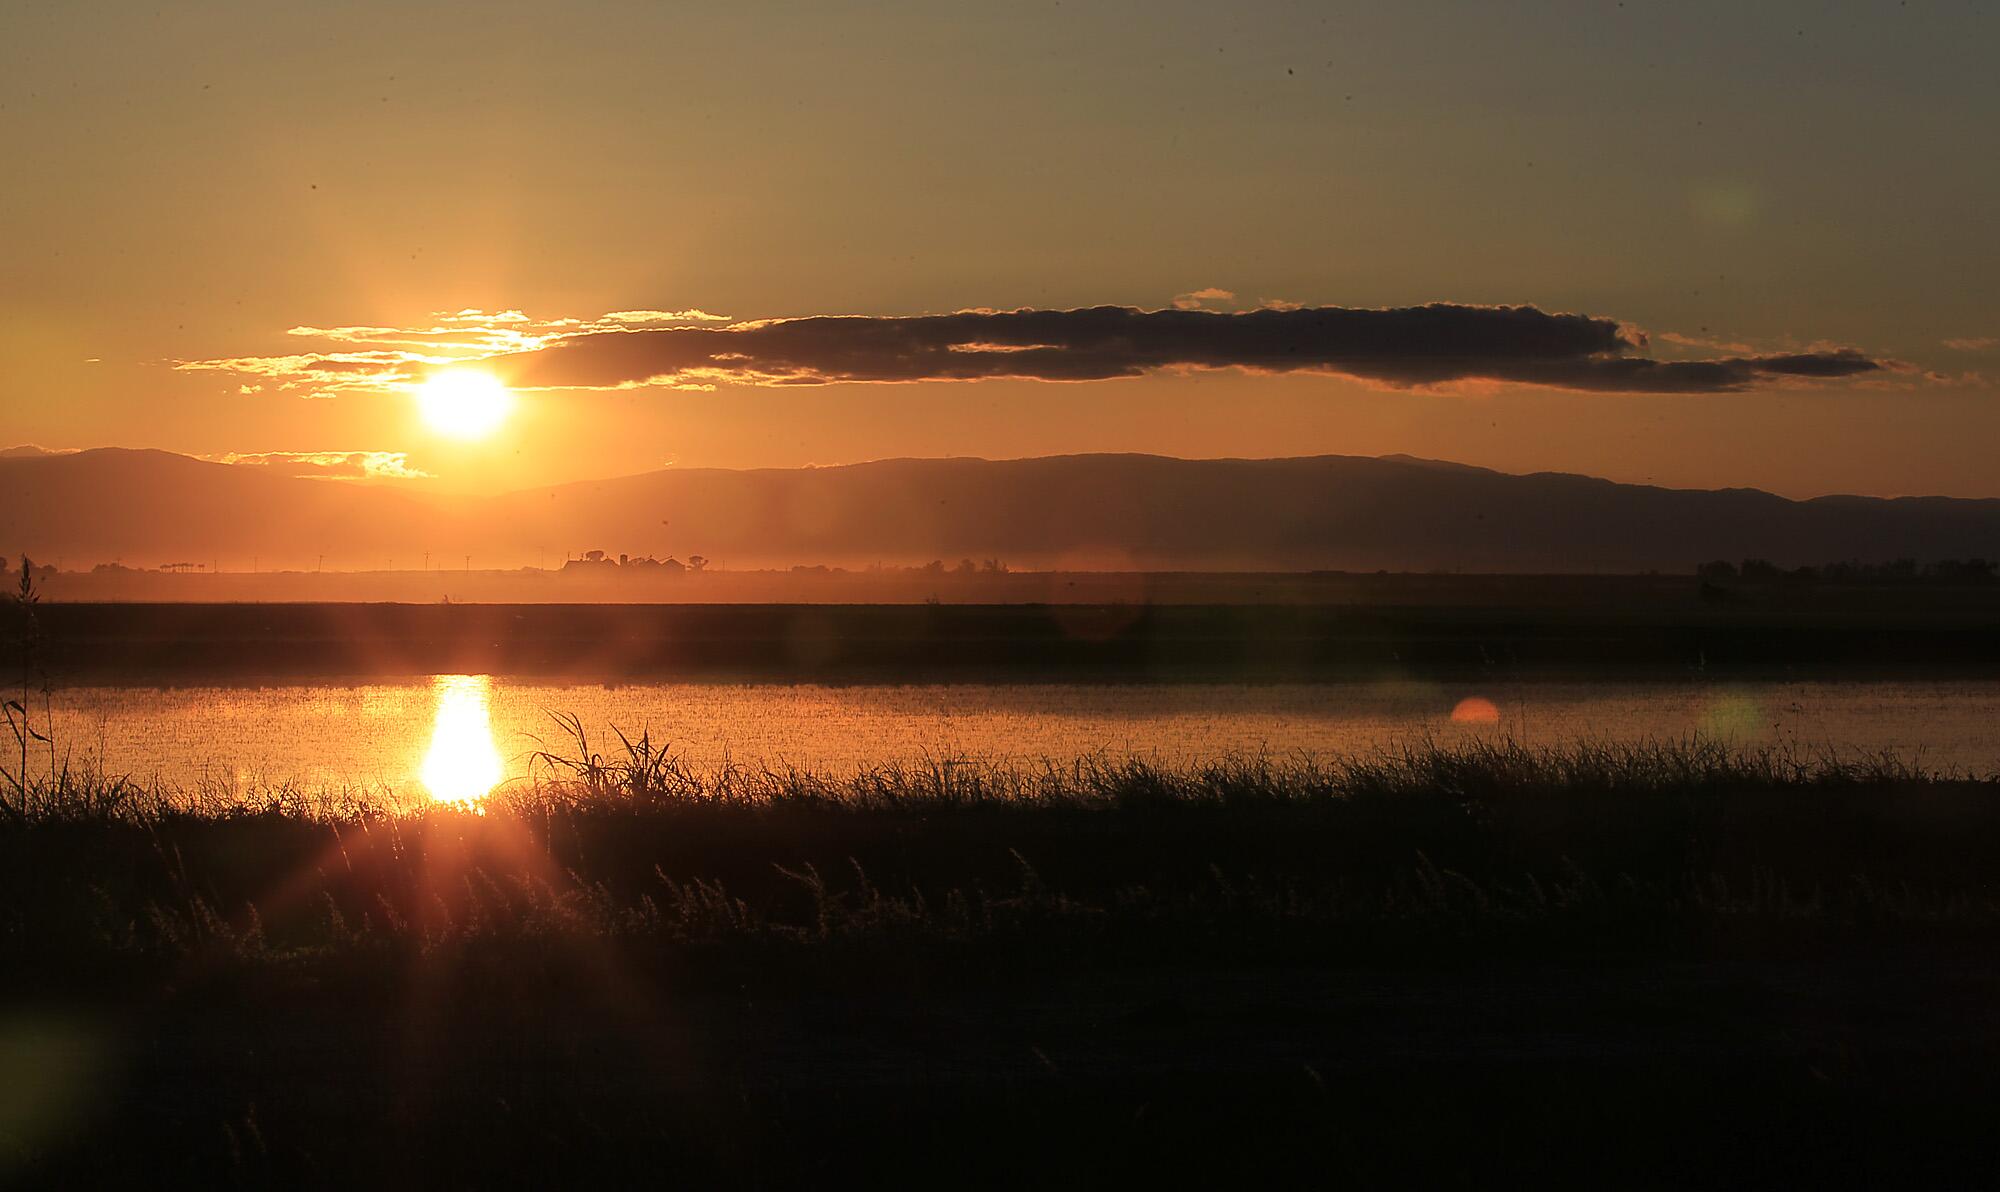 The sun sets over a flooded rice field in the Sacramento Valley.